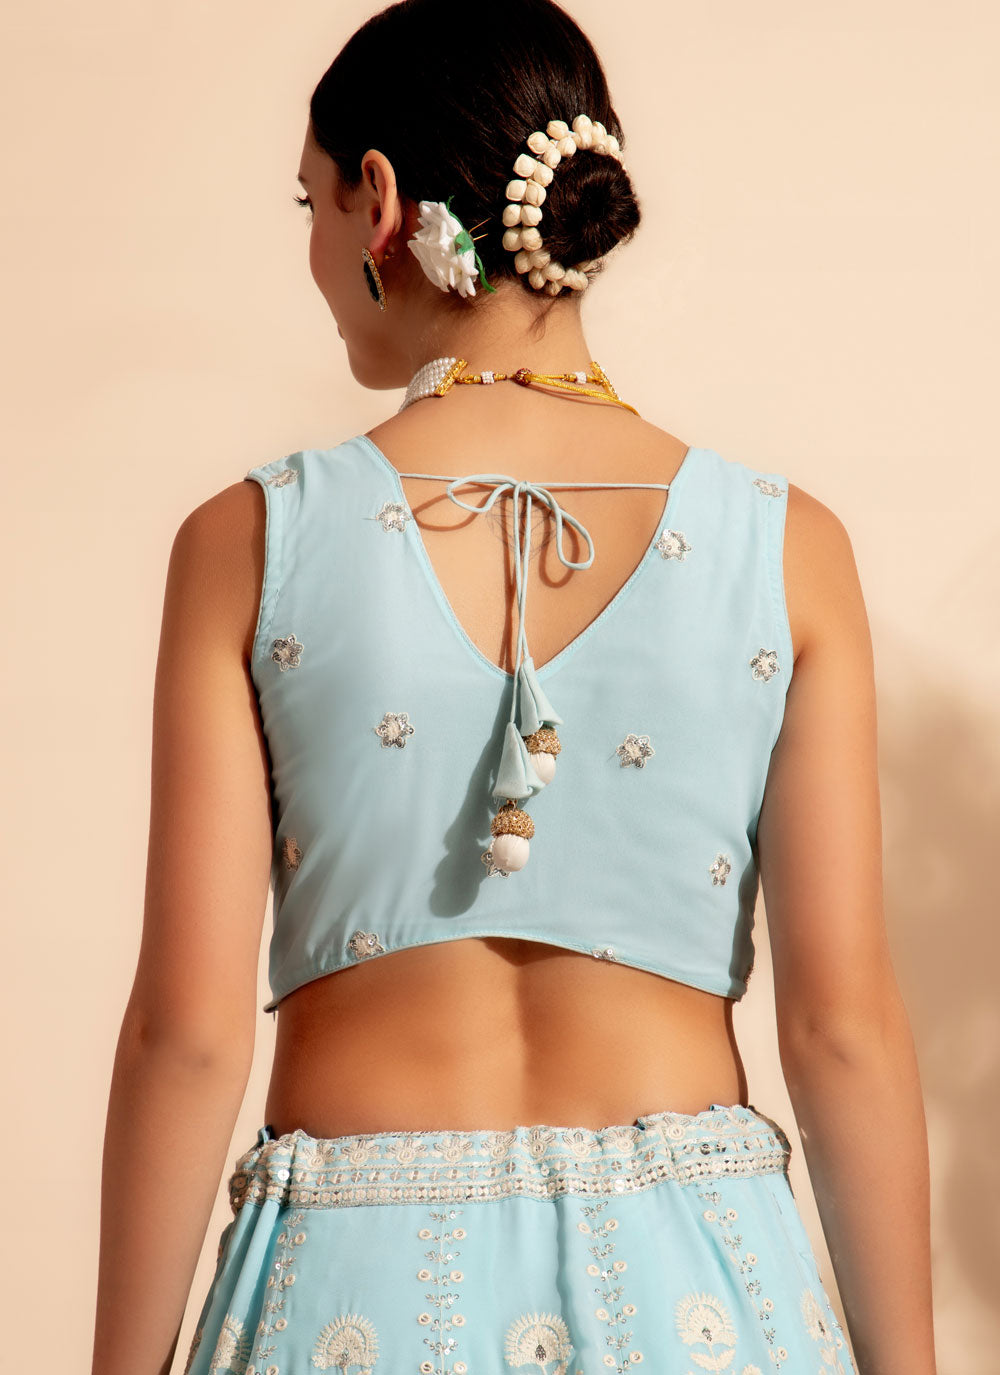 Aqua Blue Georgette Embroidered, Sequins And Thread Work Readymade Lehenga Choli For Reception